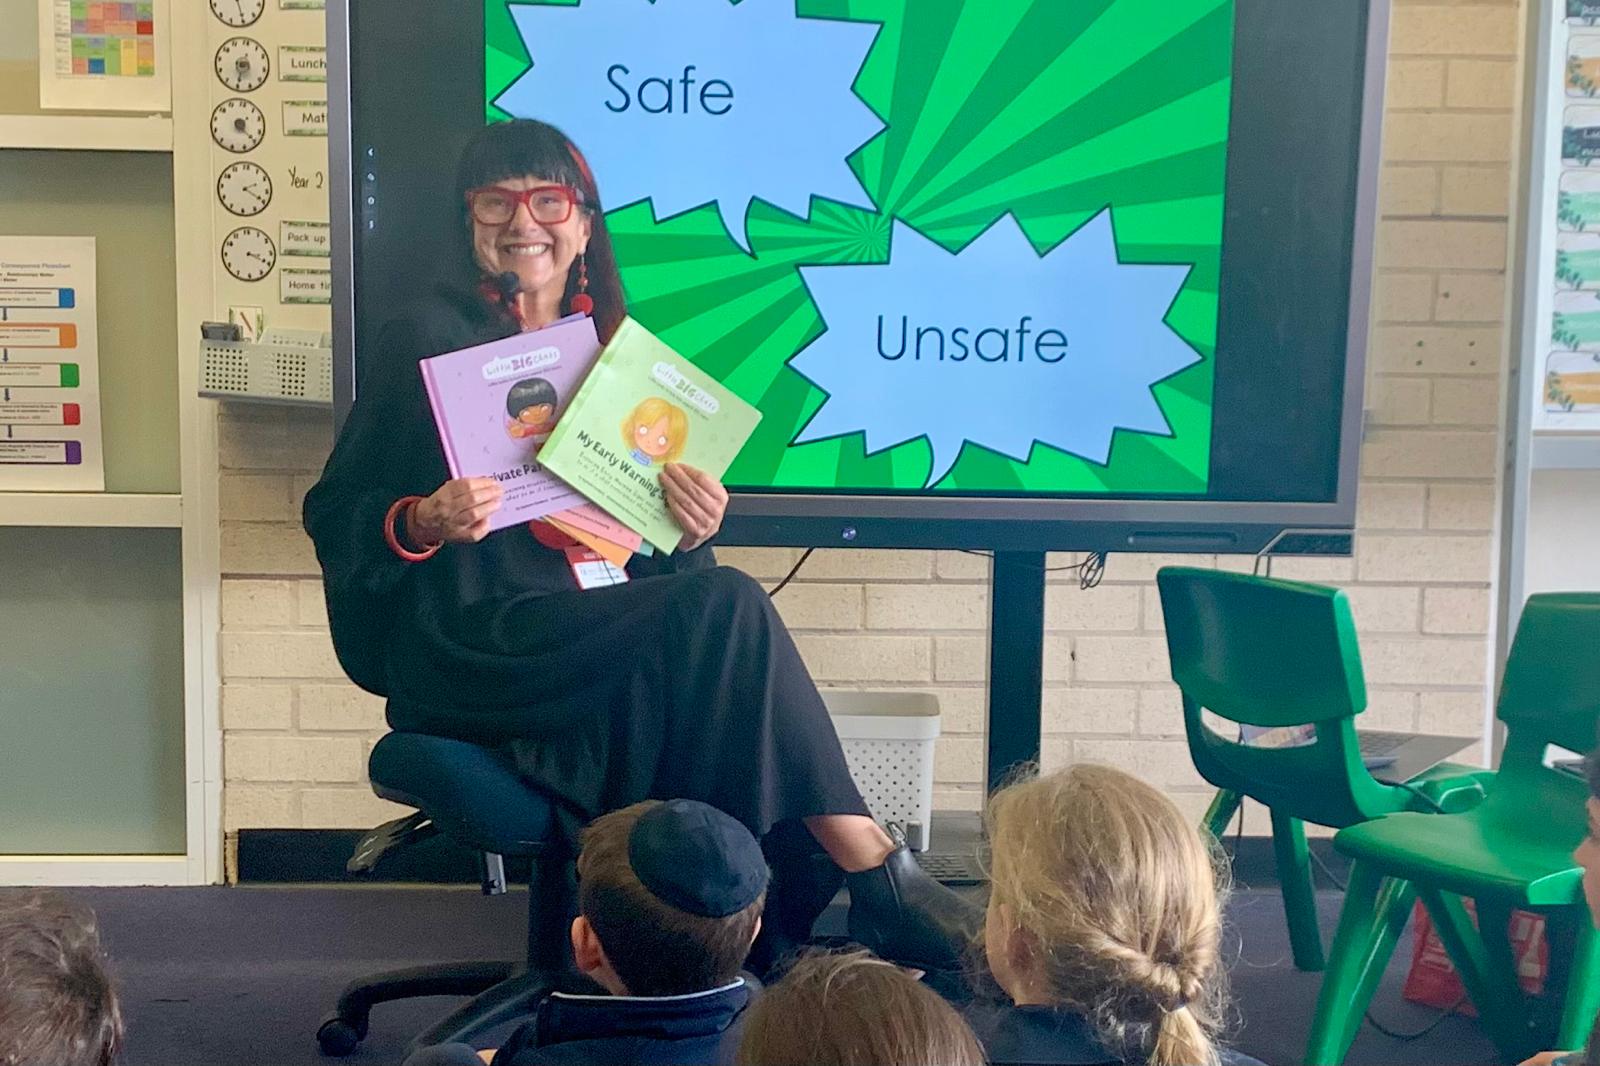 Rowena in action during a school program teaching about the importance of using the words safe and unsafe instead of good and bad.